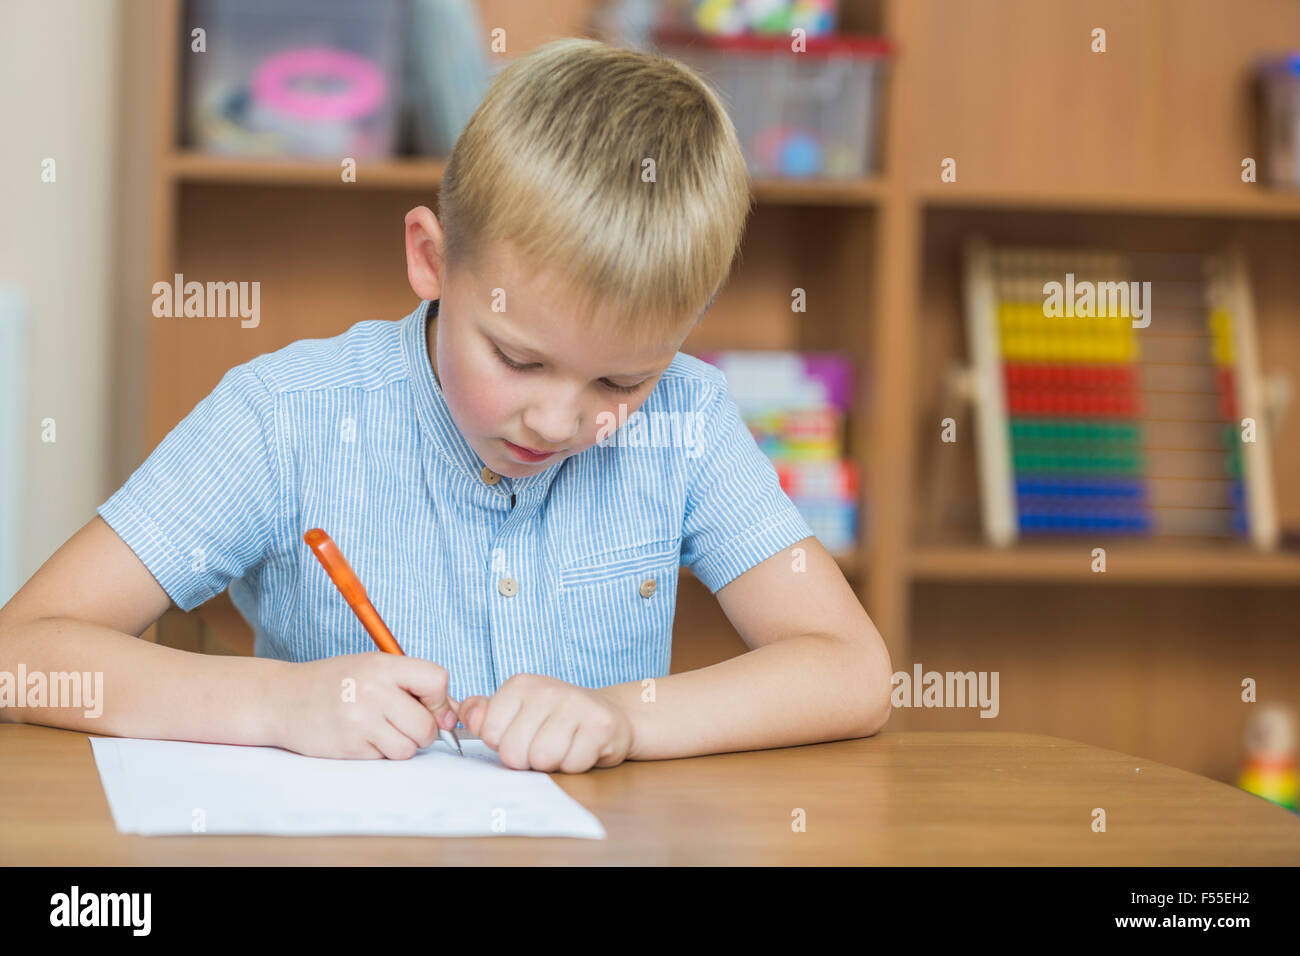 Concentrated boy writing on paper at table Stock Photo